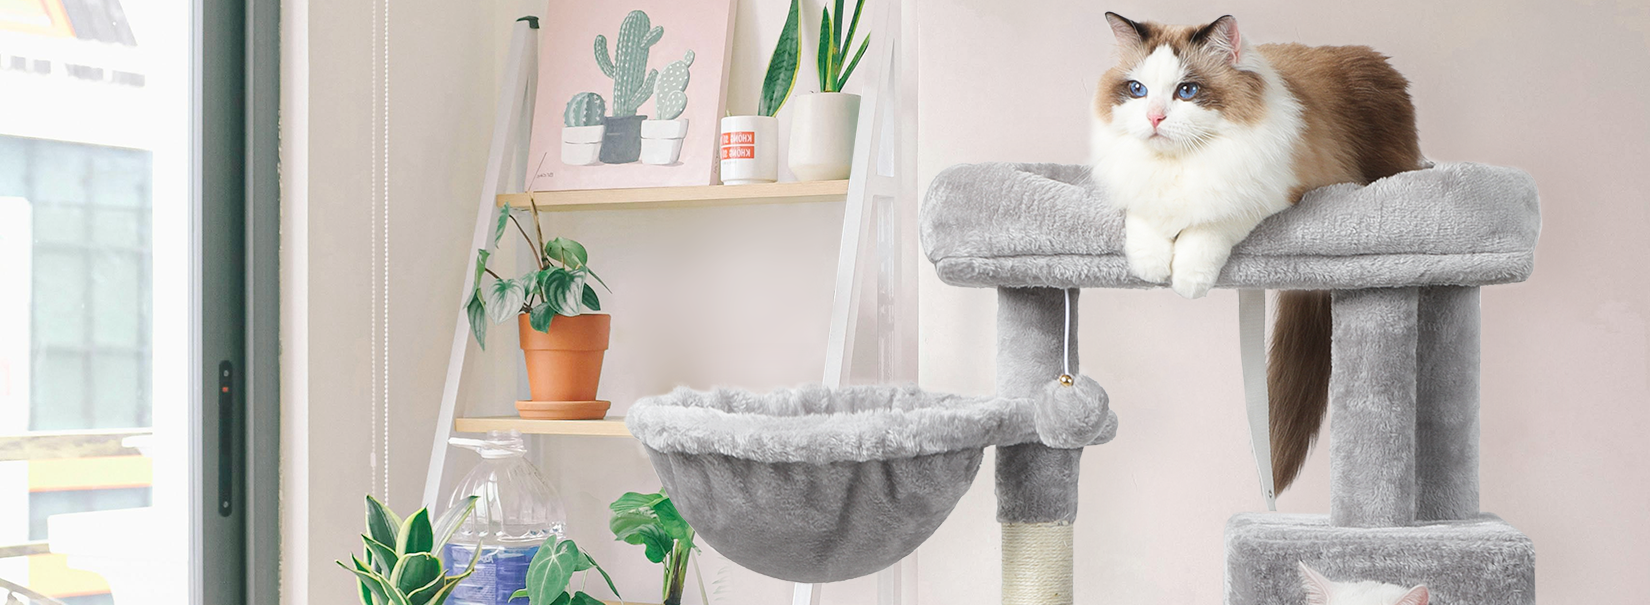 4 causes for purchasing a giant cat tree